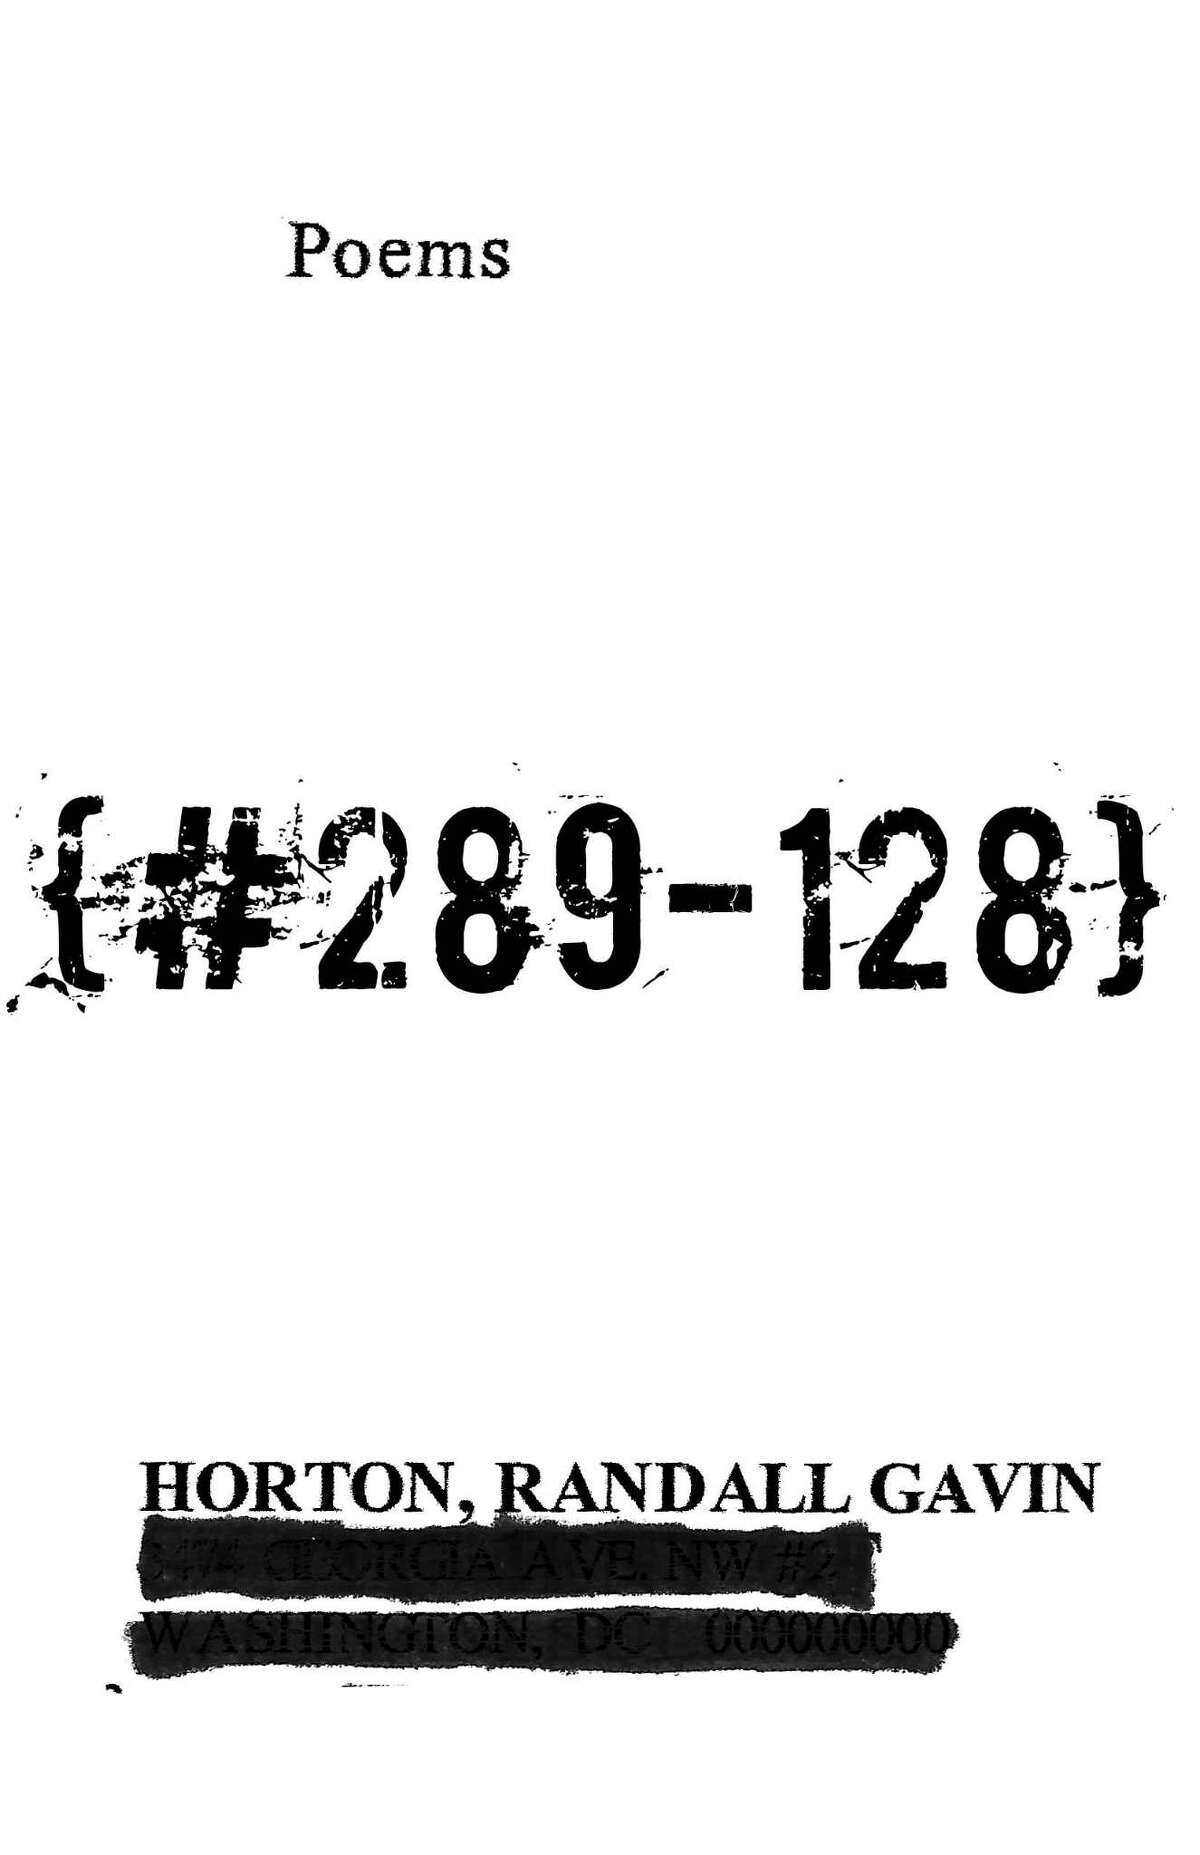 Randall Horton’s new collection of poetry, “#289-128,” examines life during and after prison.